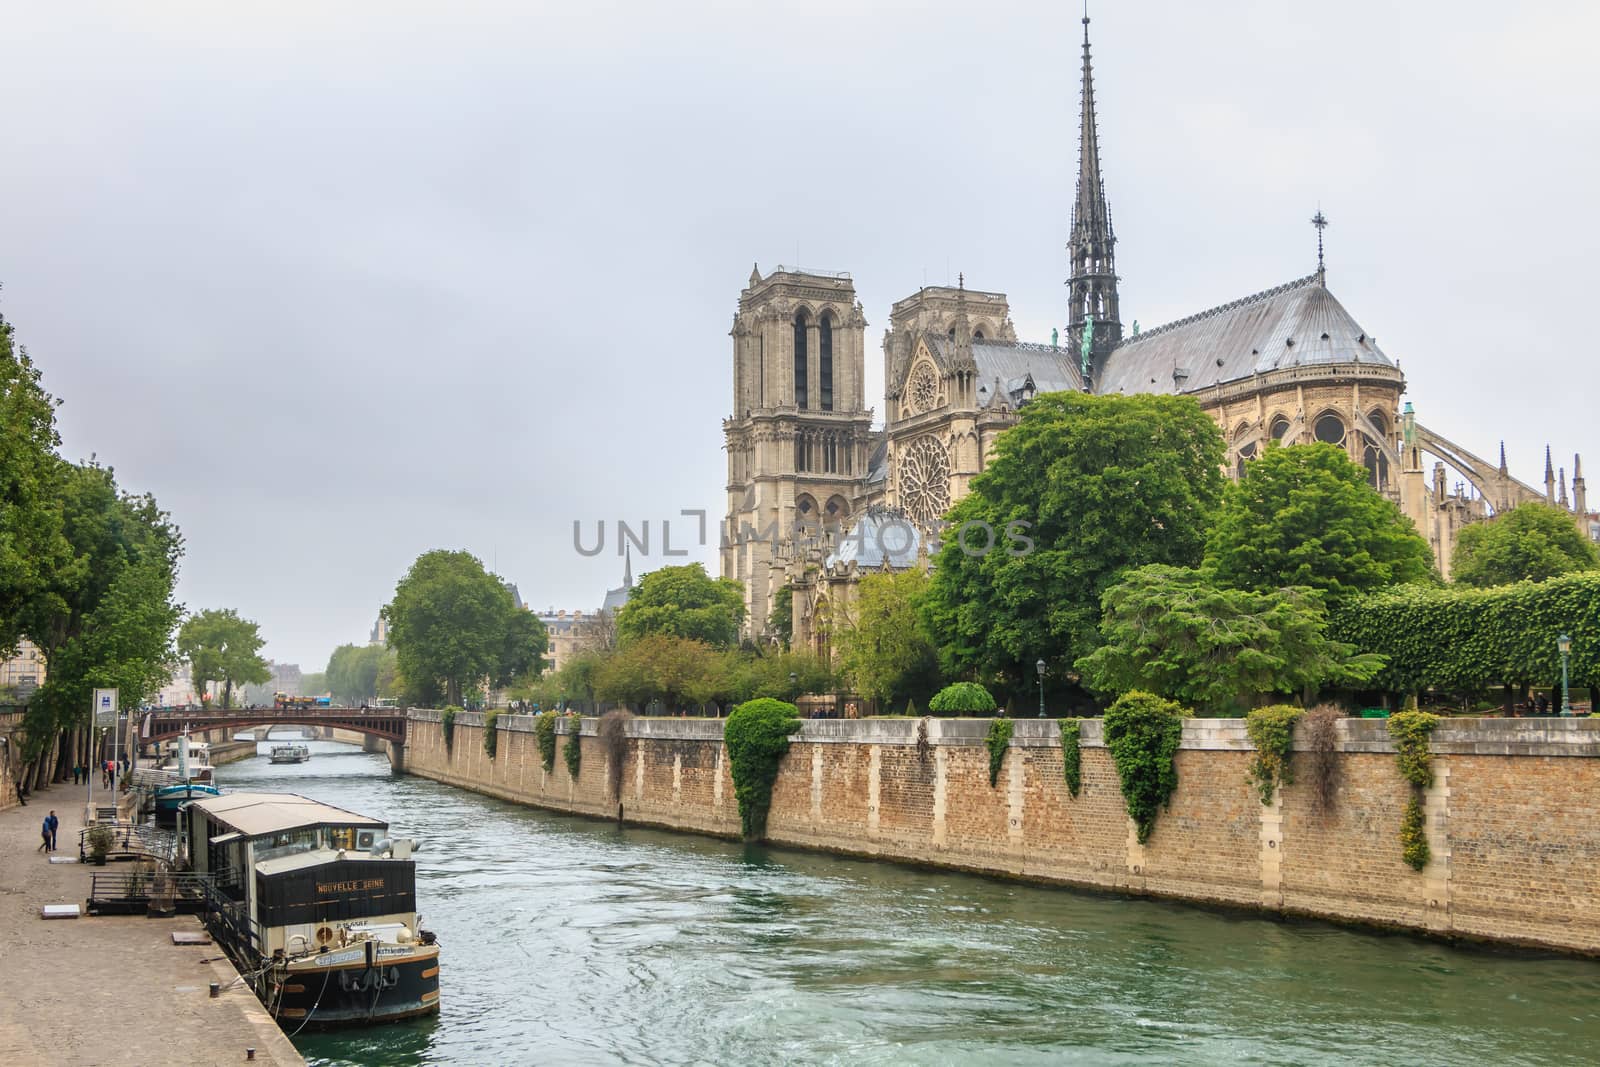 Paris, France - May 8, 2017 - Side view of Notre Dame Cathedral on the Seine with barges on a spring day